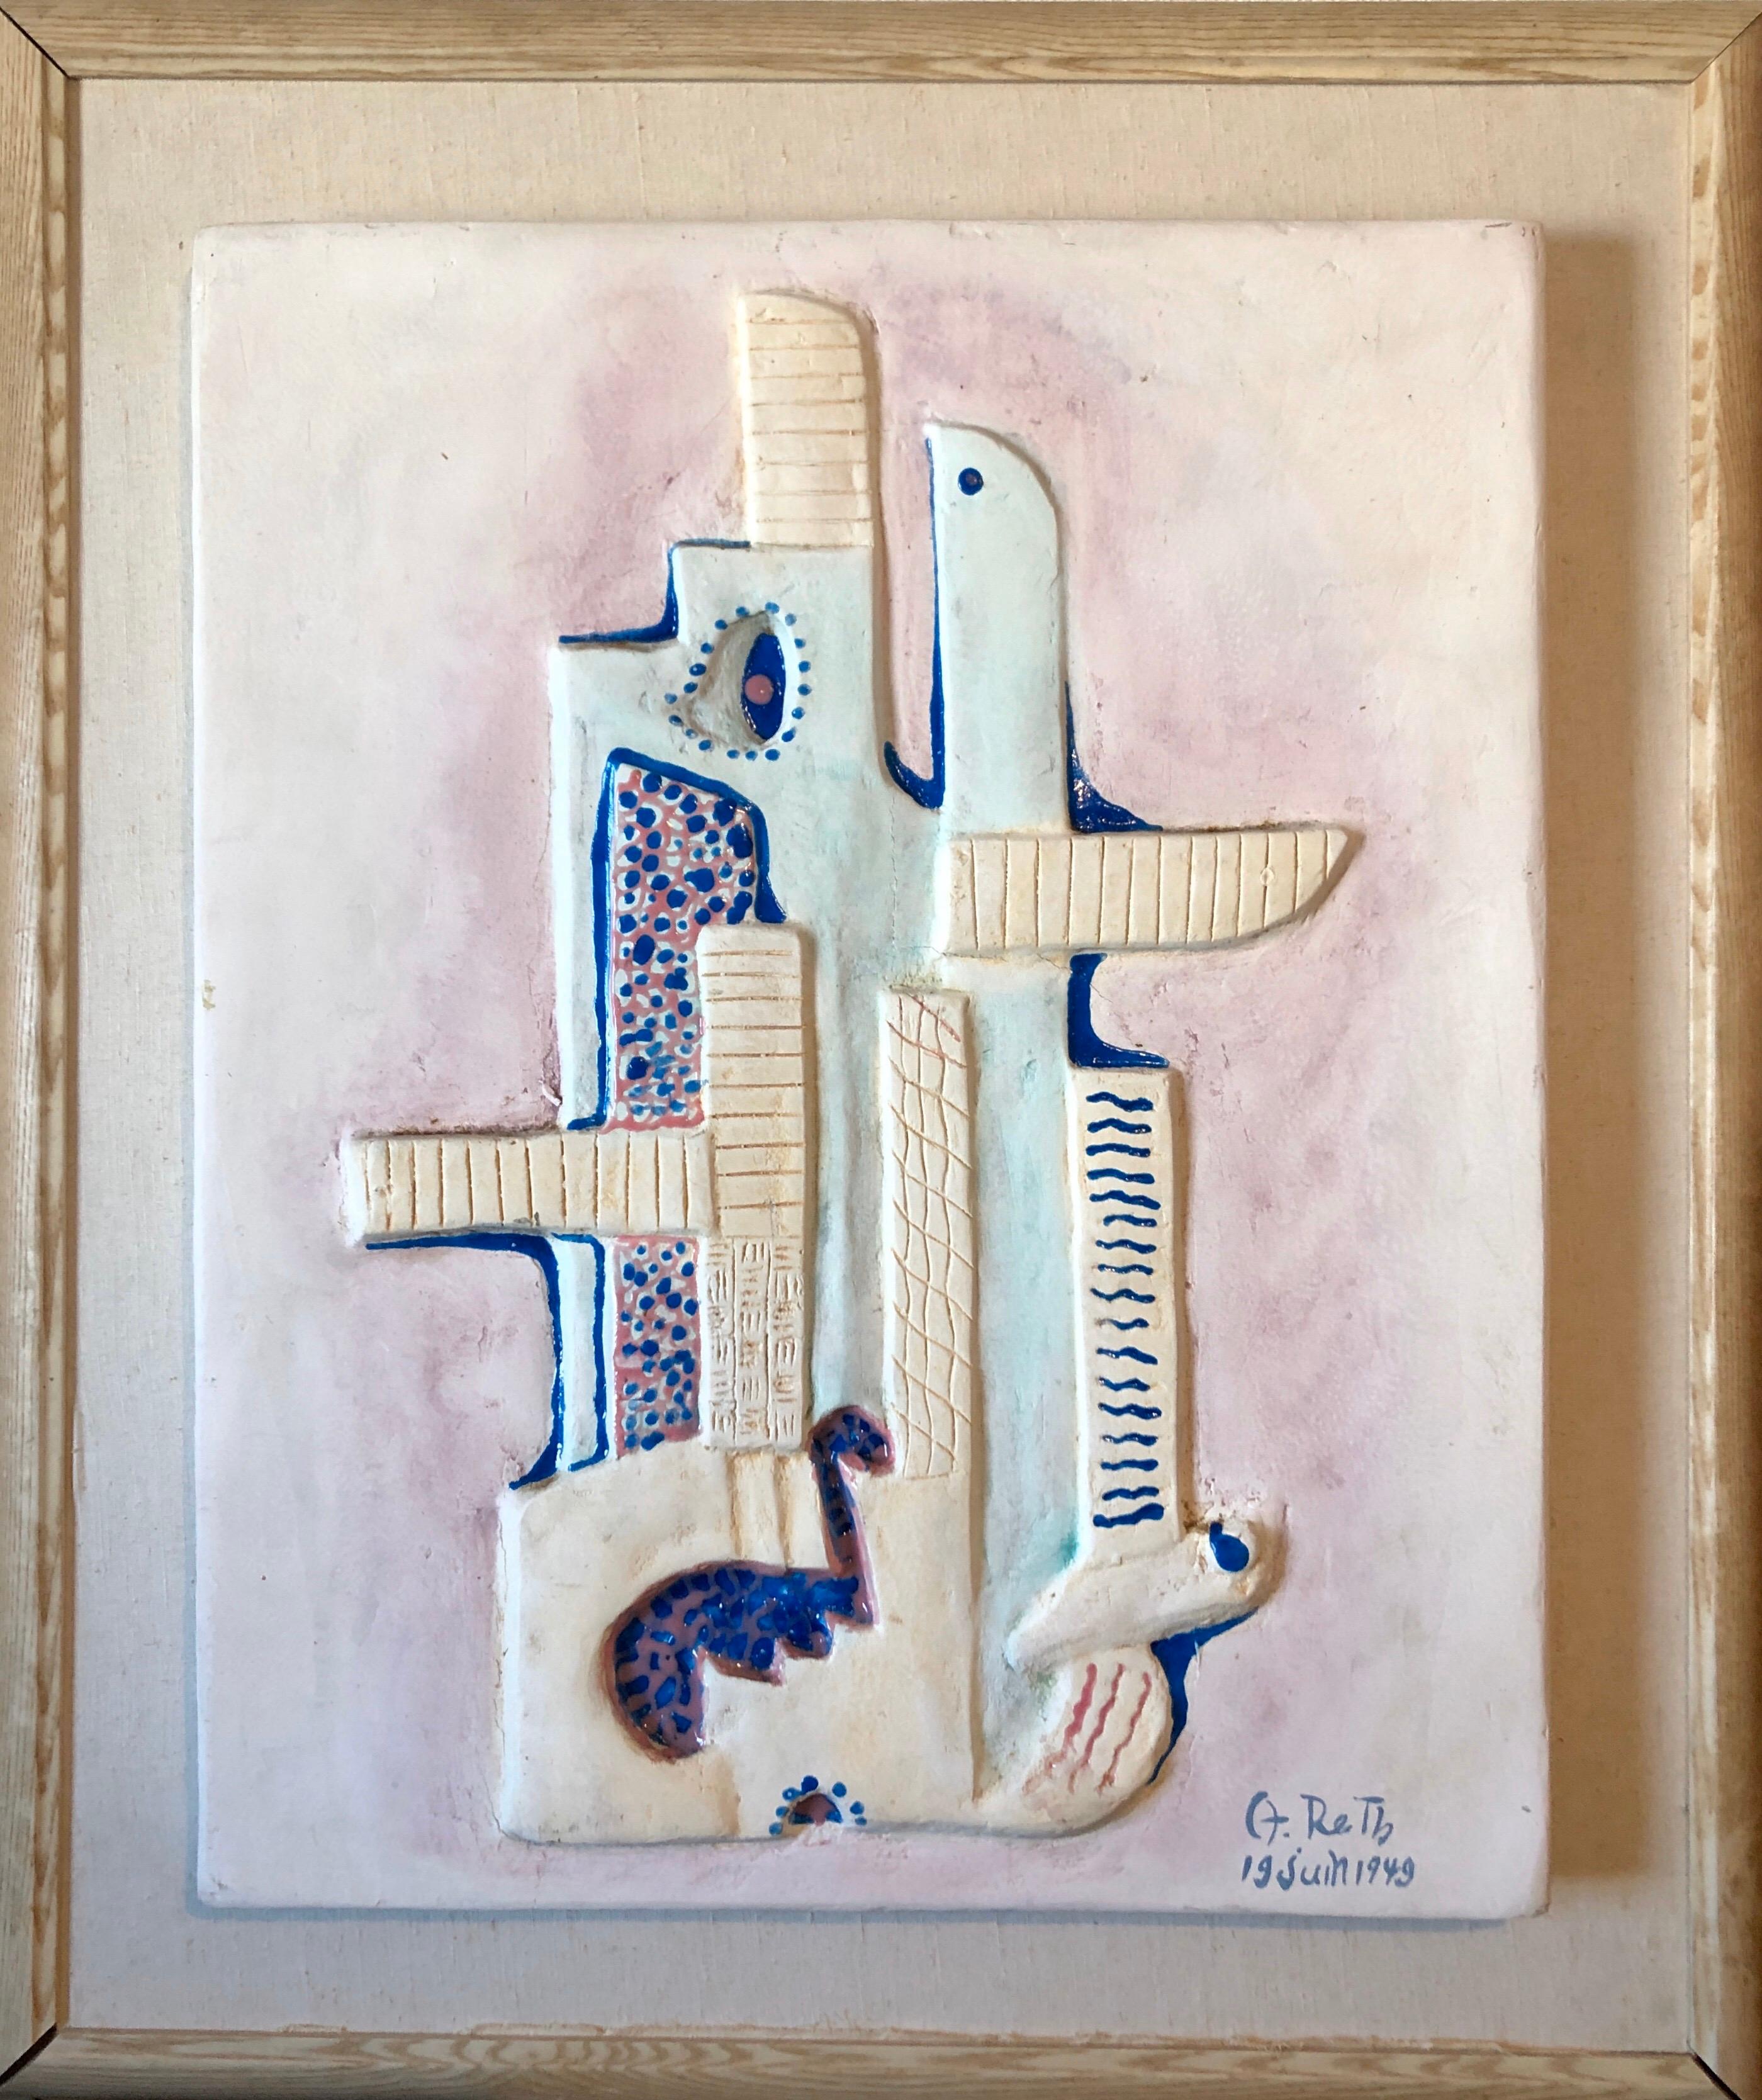 Alfred Reth Abstract Sculpture - 1949 Hungarian Cubism Wall Hanging Relief Sculpture with Enamel Painting Cubist 